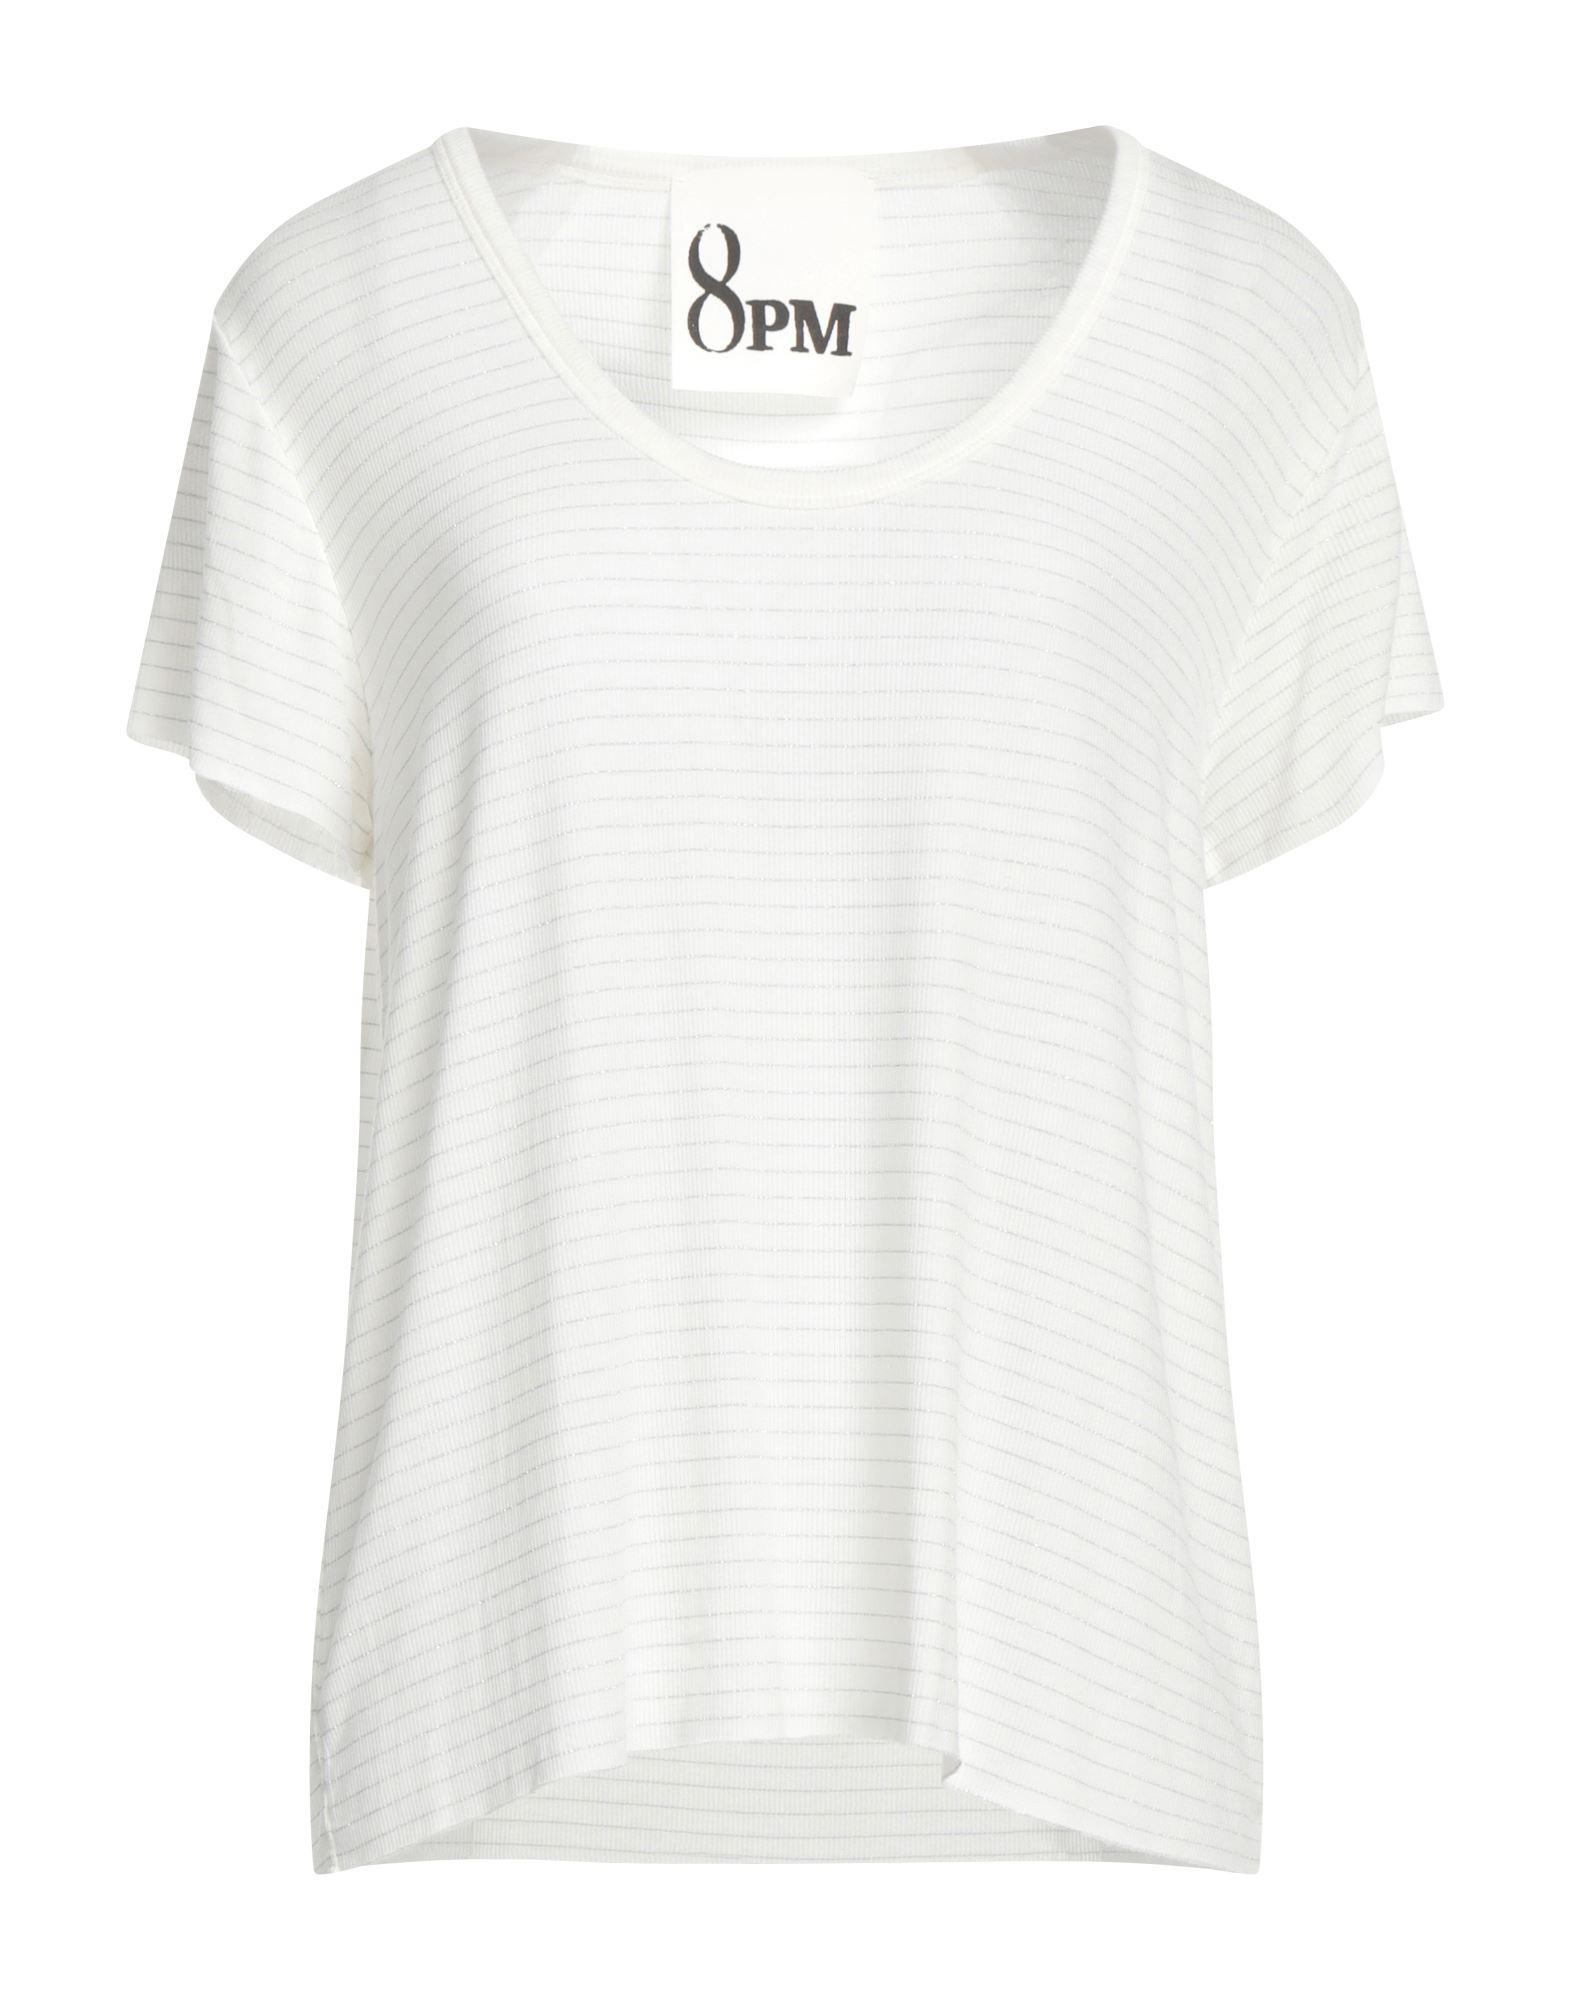 8pm T-shirt in White | Lyst